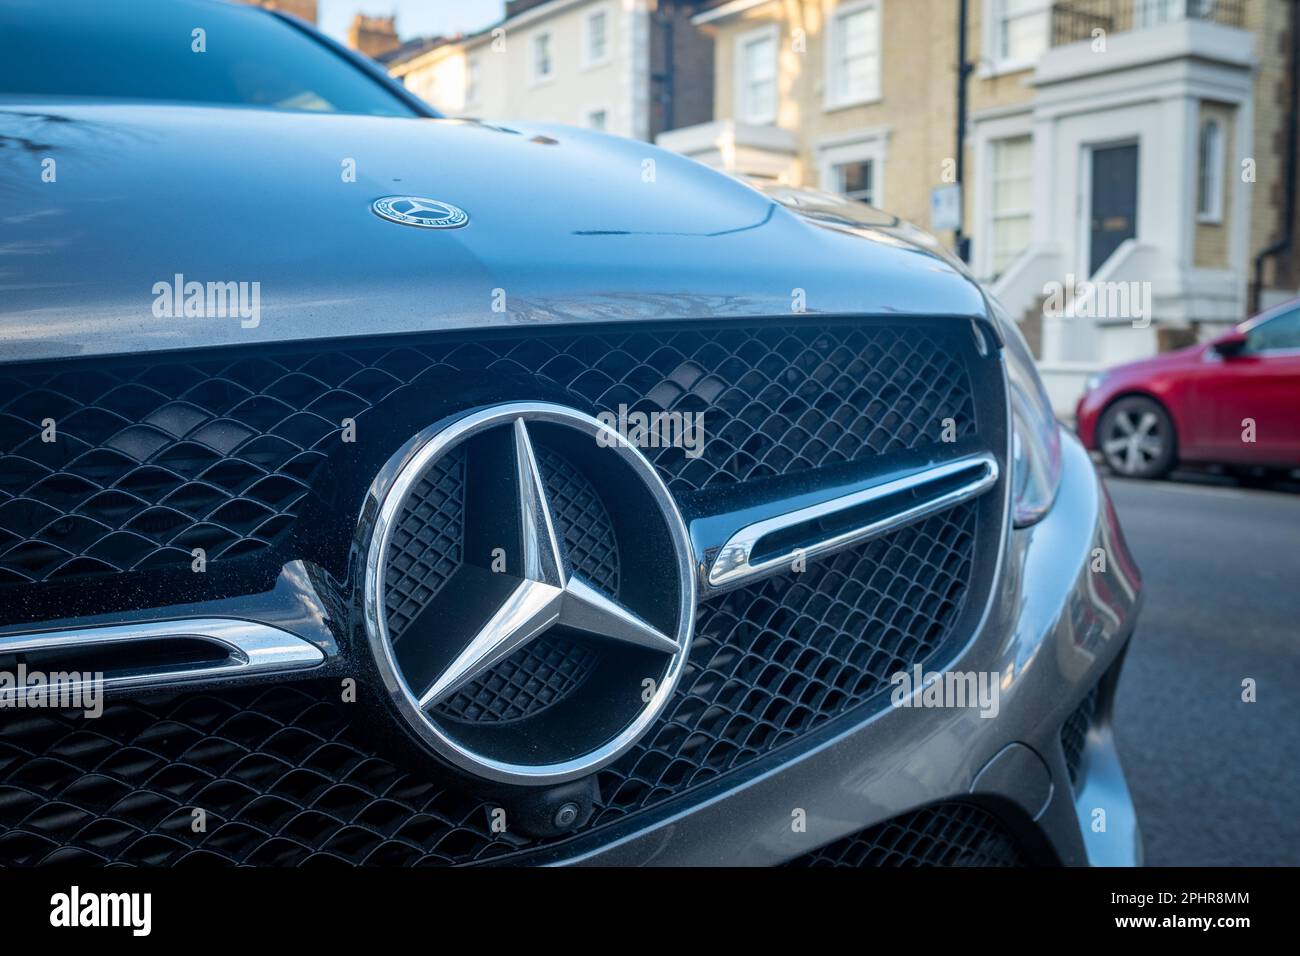 London- January 2023: Mercedes car badge logo on car parked in urban residential location Stock Photo